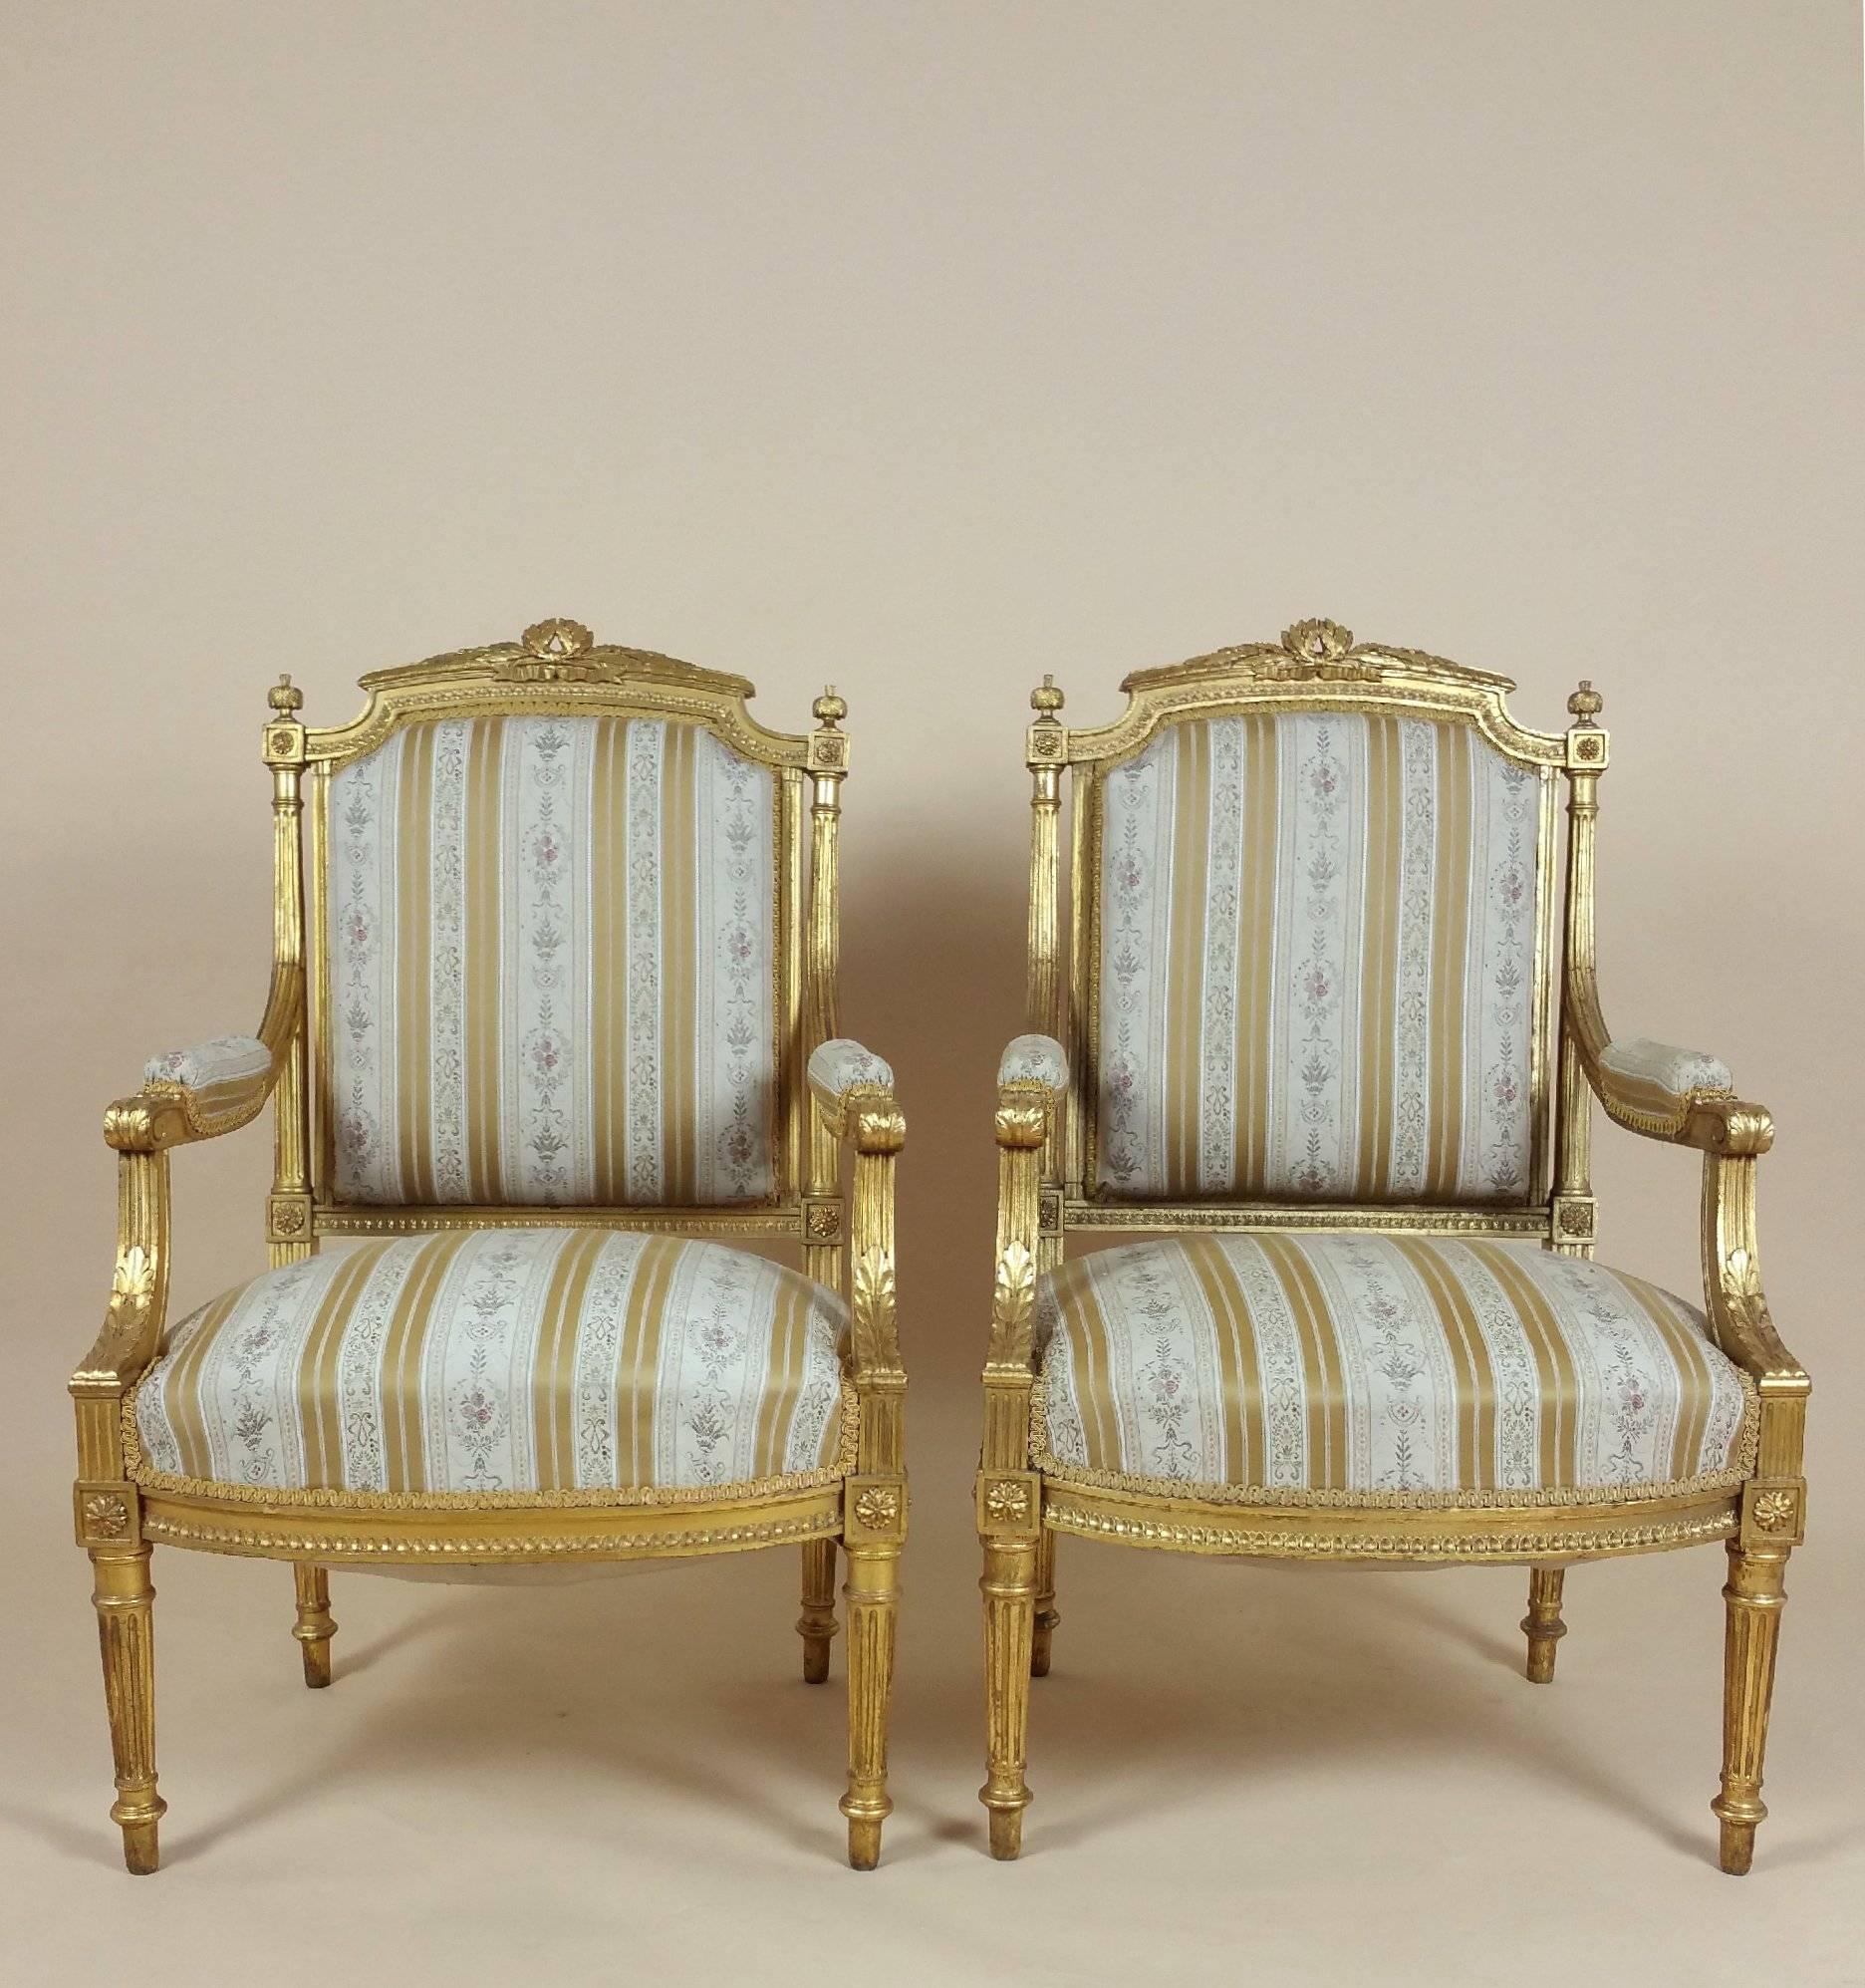 This stunning pair of 19th century French carved giltwood fauteuils are decorated with a design of acanthus leaves, both on the scrolled arms and as a border around the chair. The fauteuils stand on reeded legs and are upholstered in an old gold